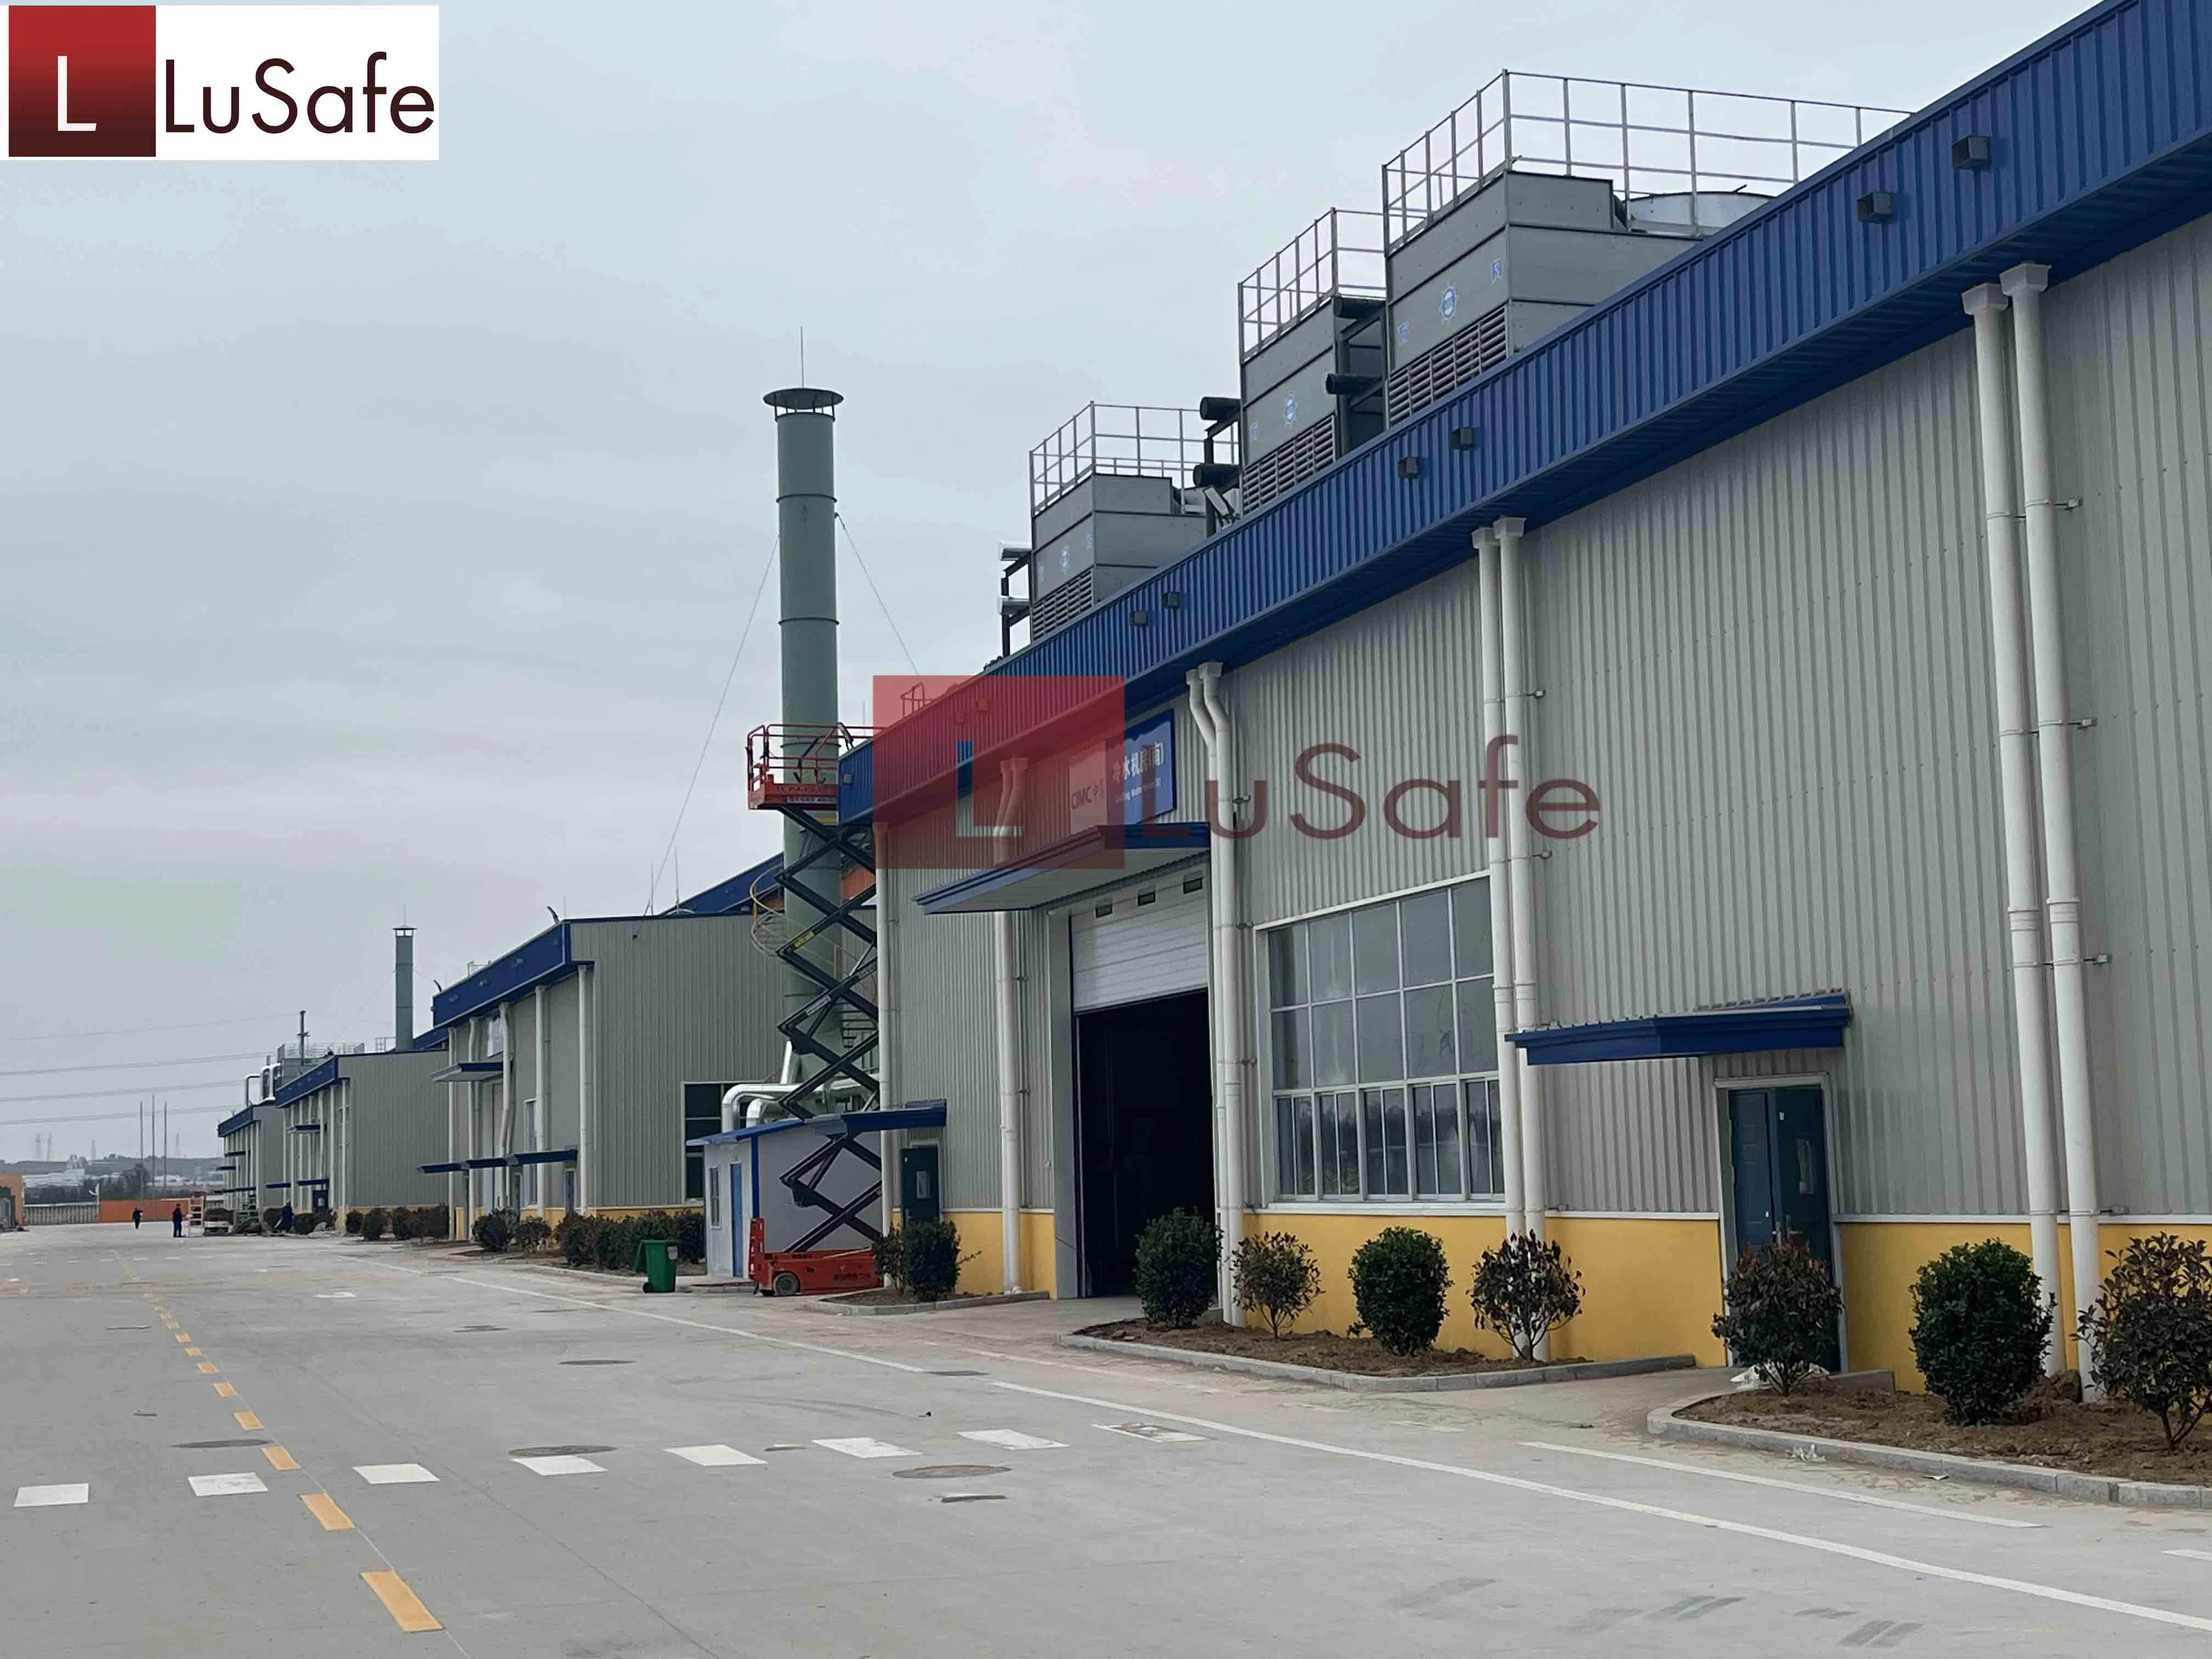 Cfrt Continuous Fiber Reinforced Thermoplastic Strip Tape Sheet Production Line